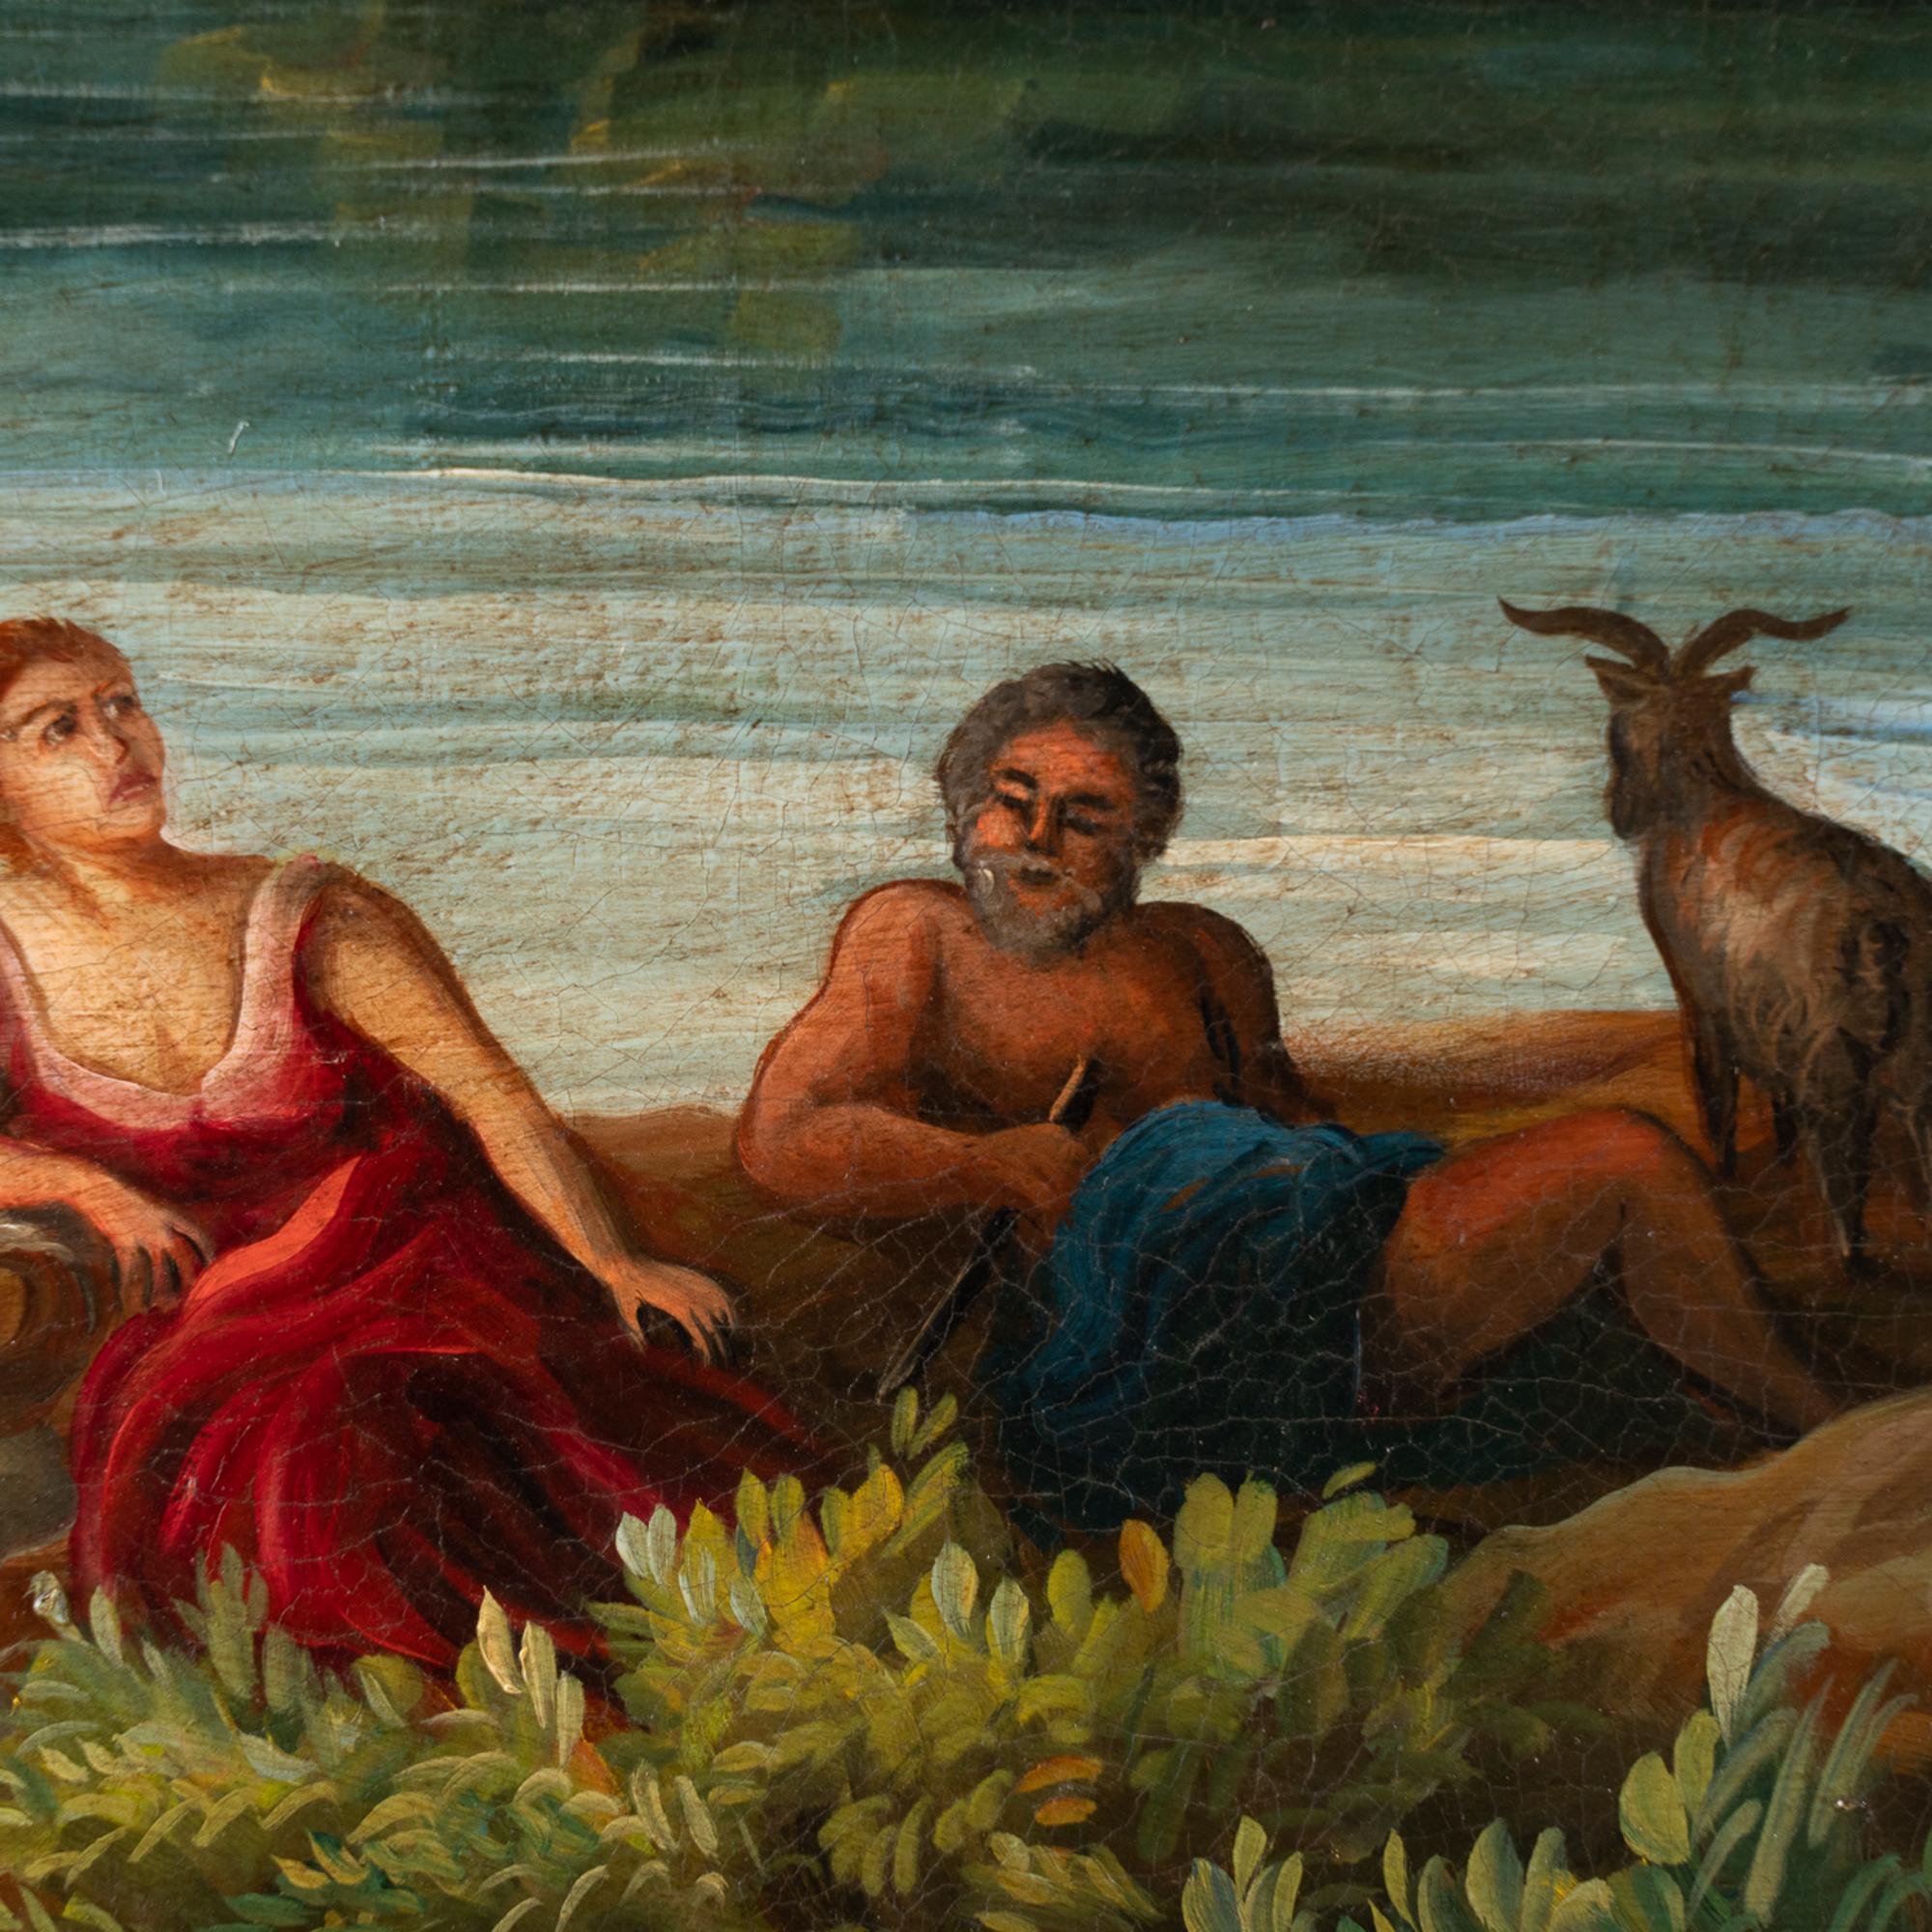 Italian Oil on Canvas Landscape Painting with Woman & Man by River, Italy, circa 1800-40 For Sale